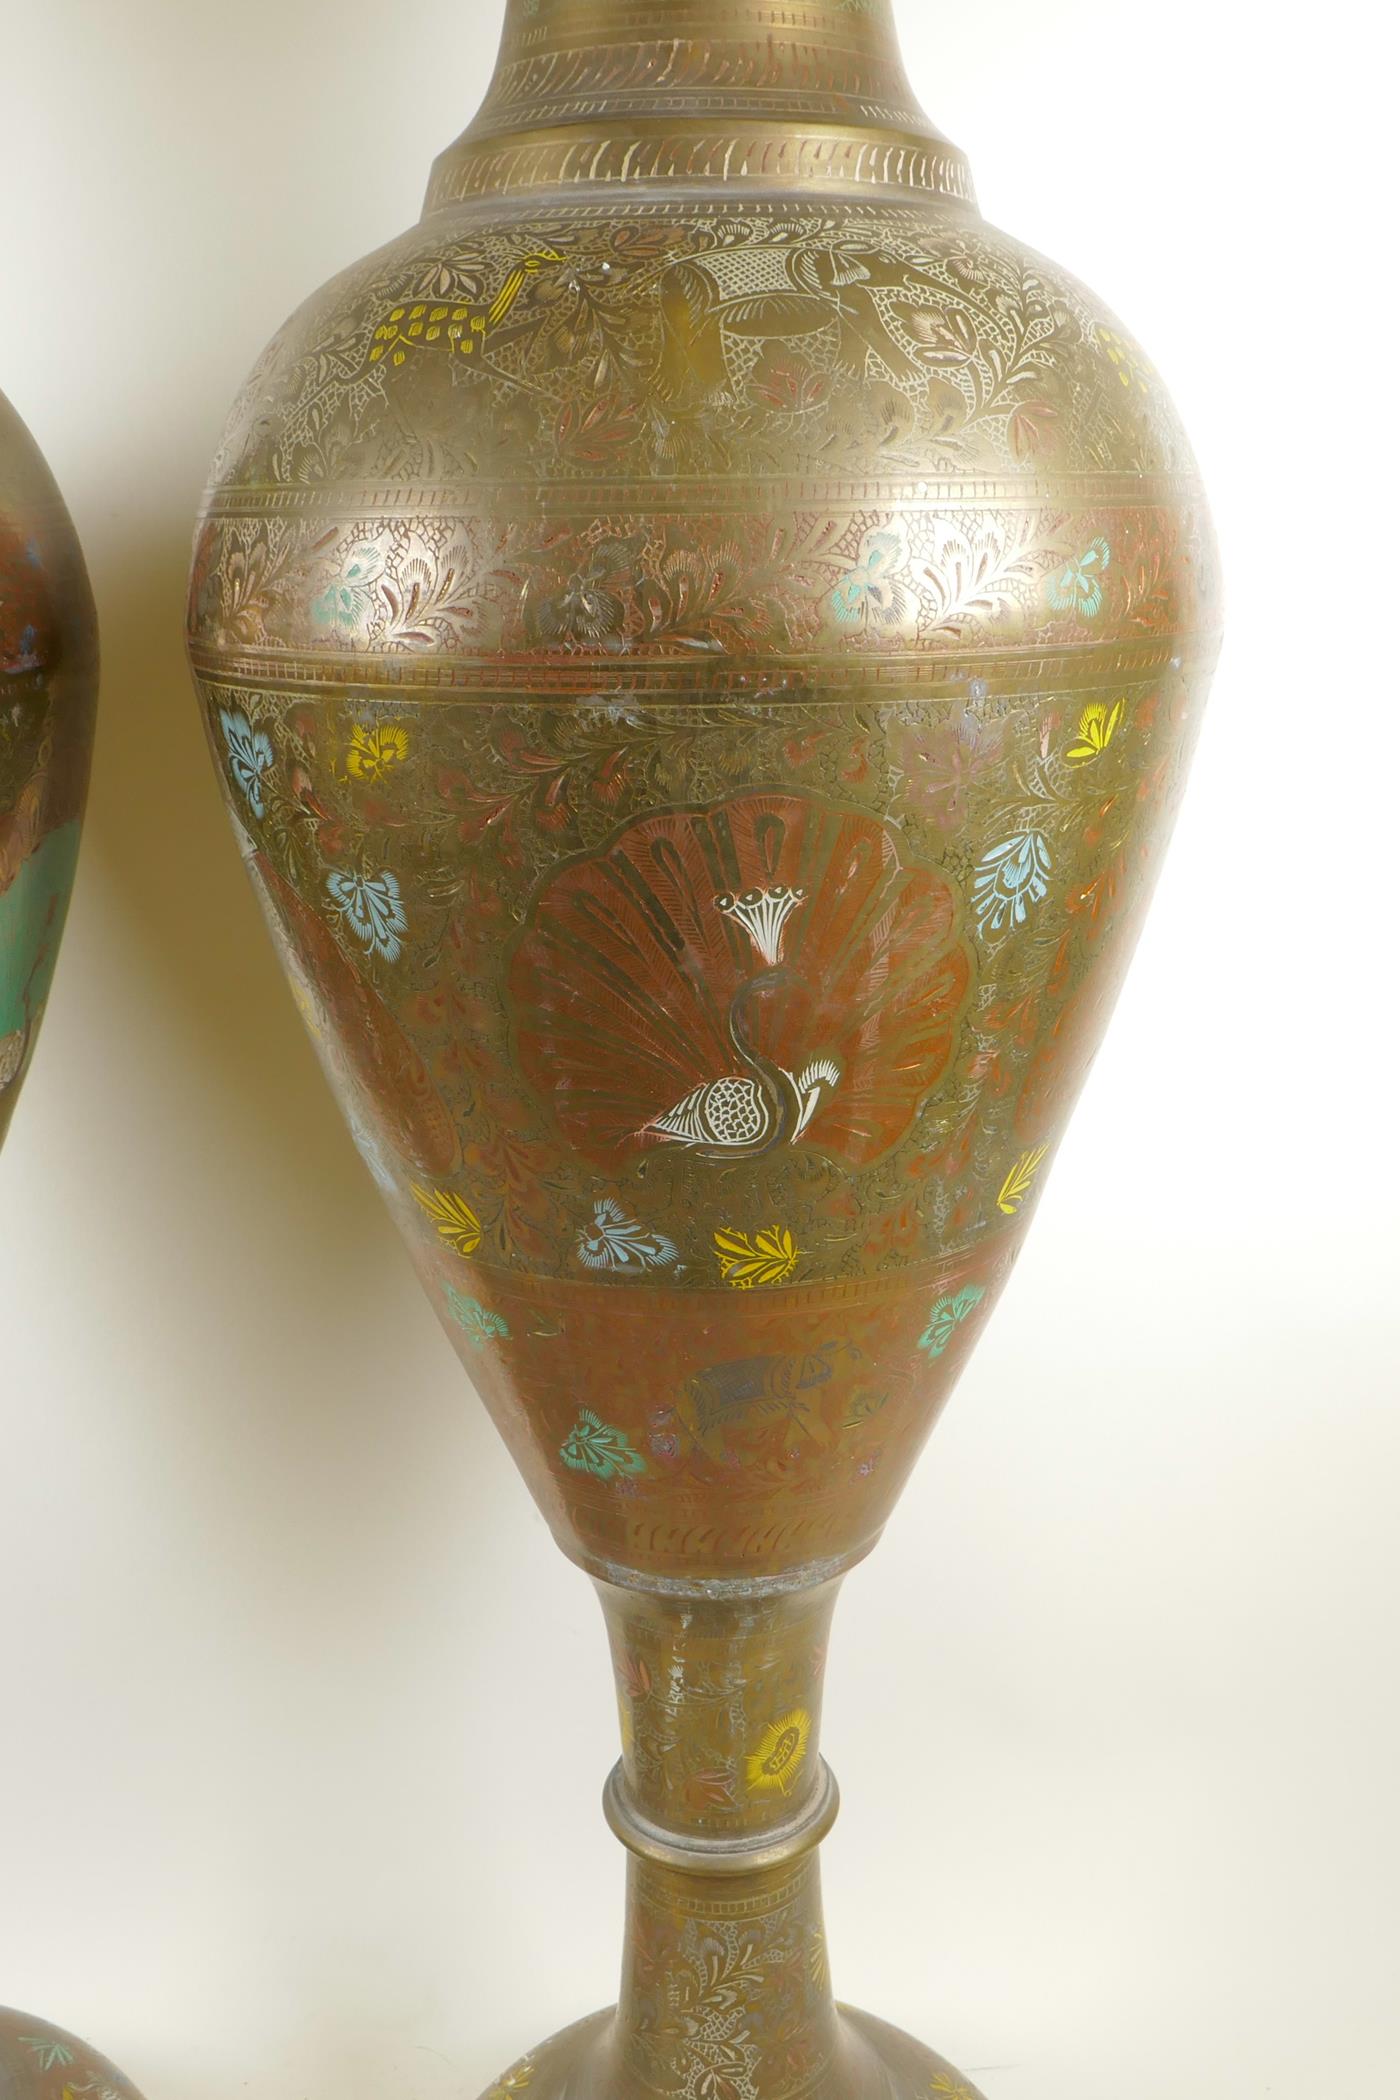 A pair of large Indian brass floor vases with engraved and painted decoration depicting peacocks, - Image 3 of 9